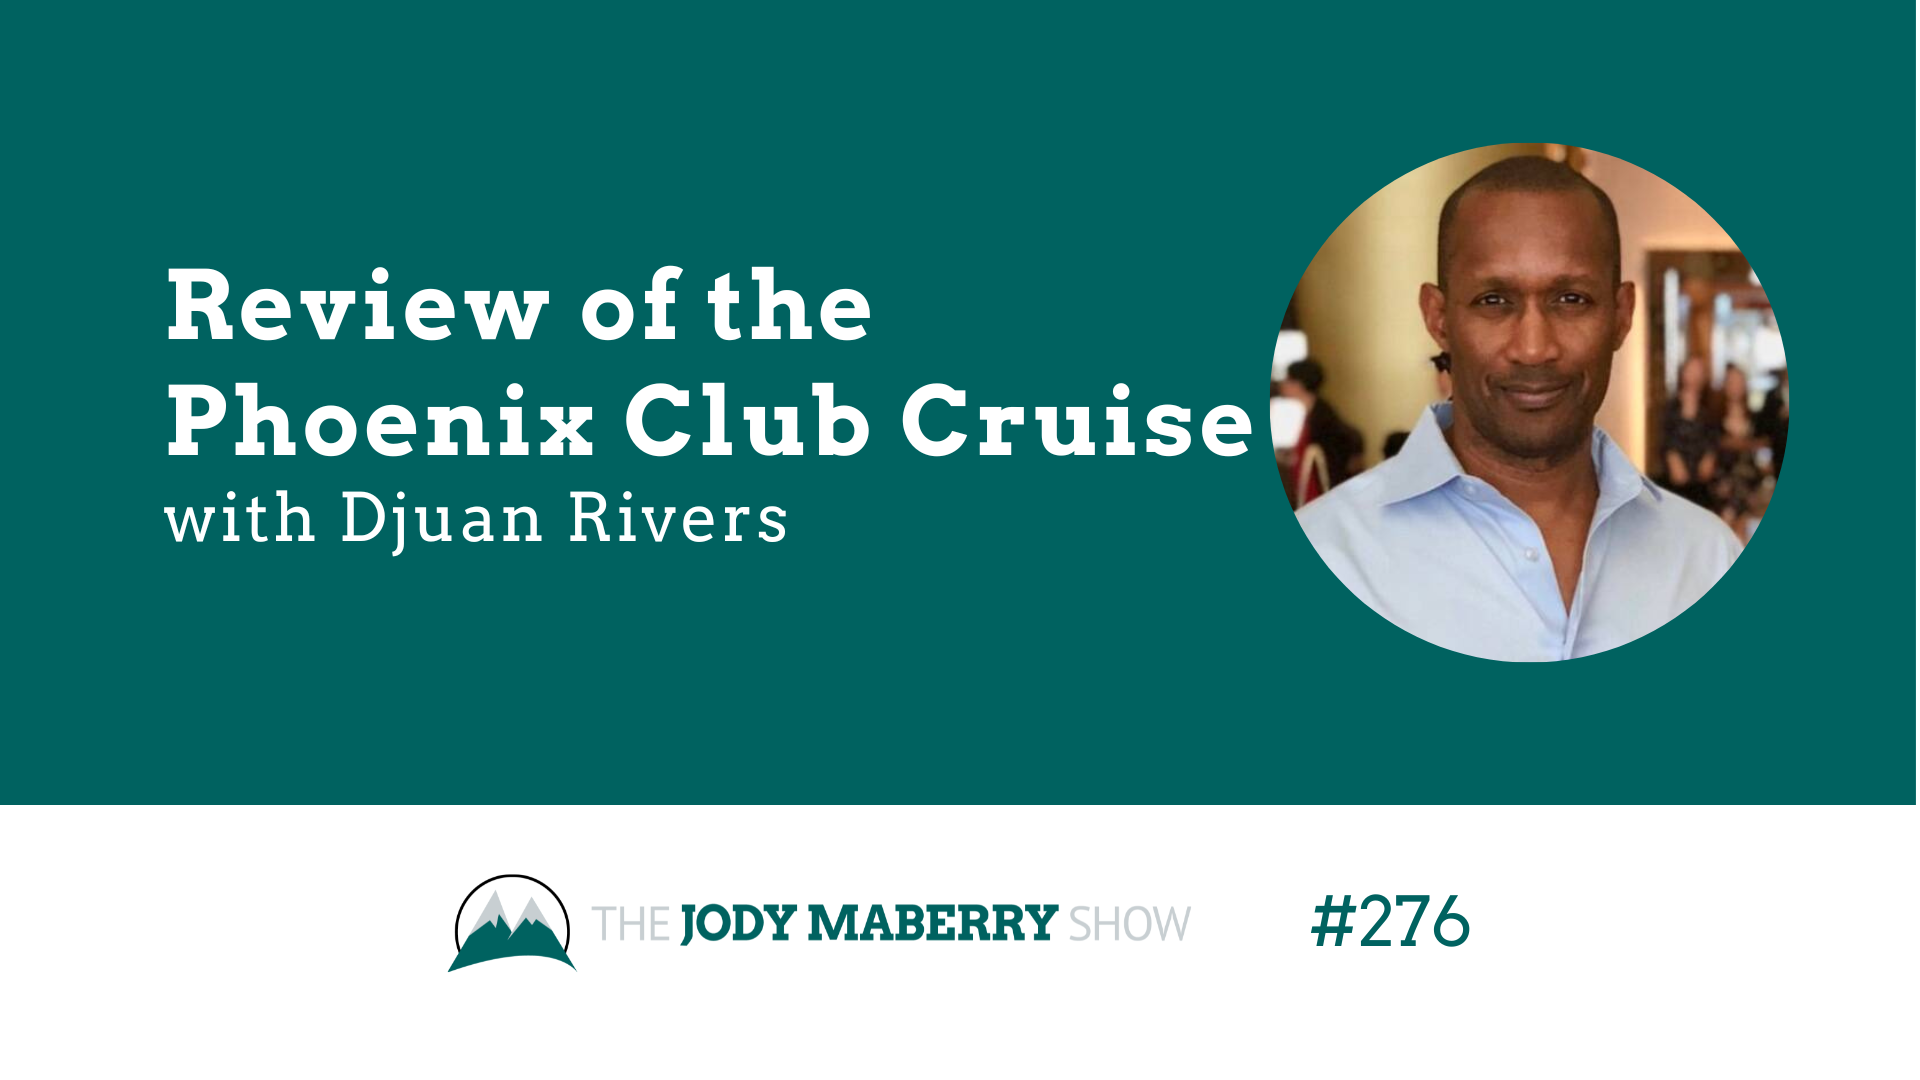 Jody Maberry Show Episode 276 Review of the Phoenix Club Cruise